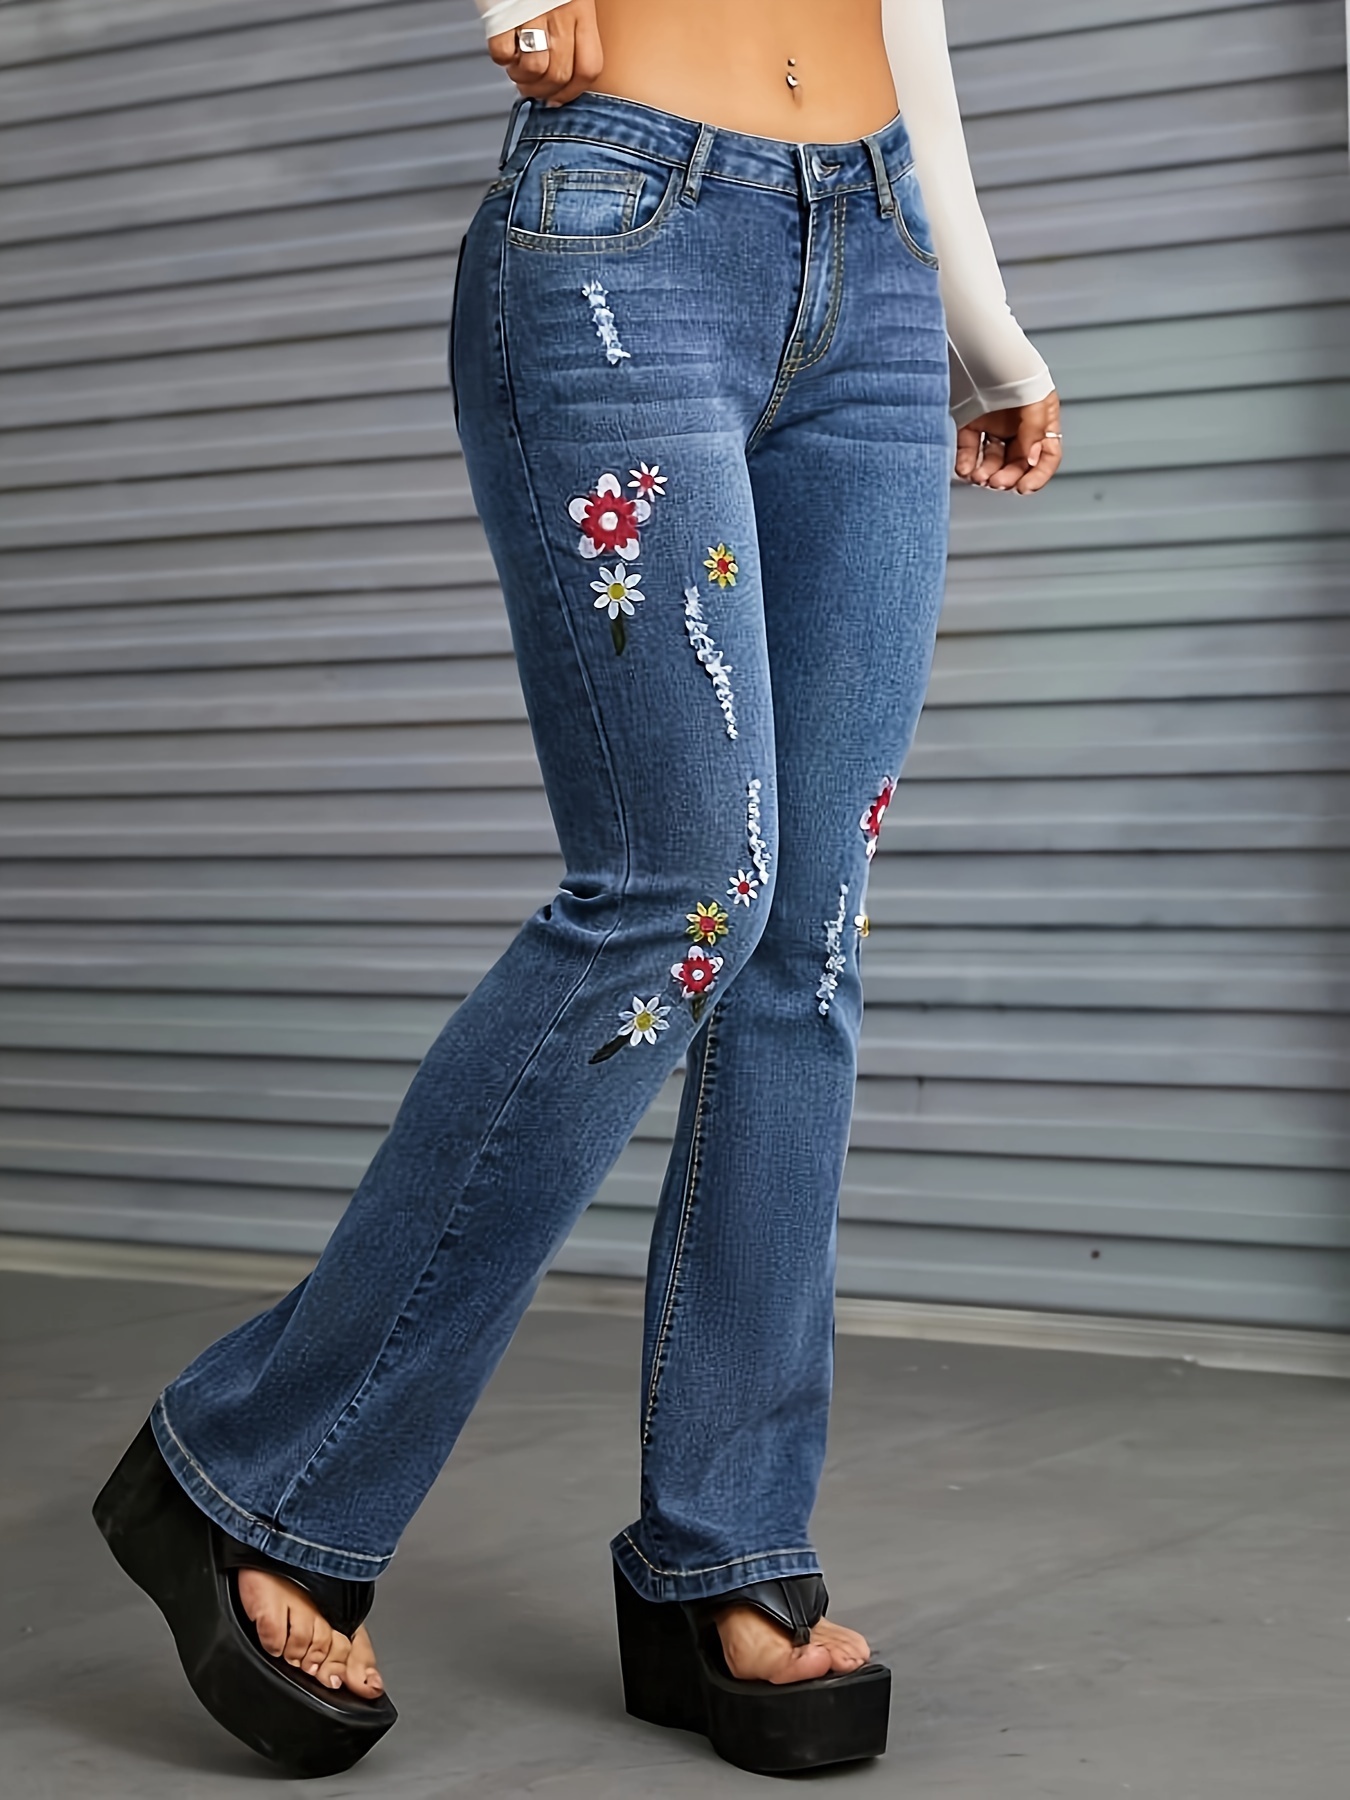 Floral Embroidered Decor Flare Jeans, High Stretch Slant Pockets Bell  Bottom Jeans, Women's Denim Jeans & Clothing